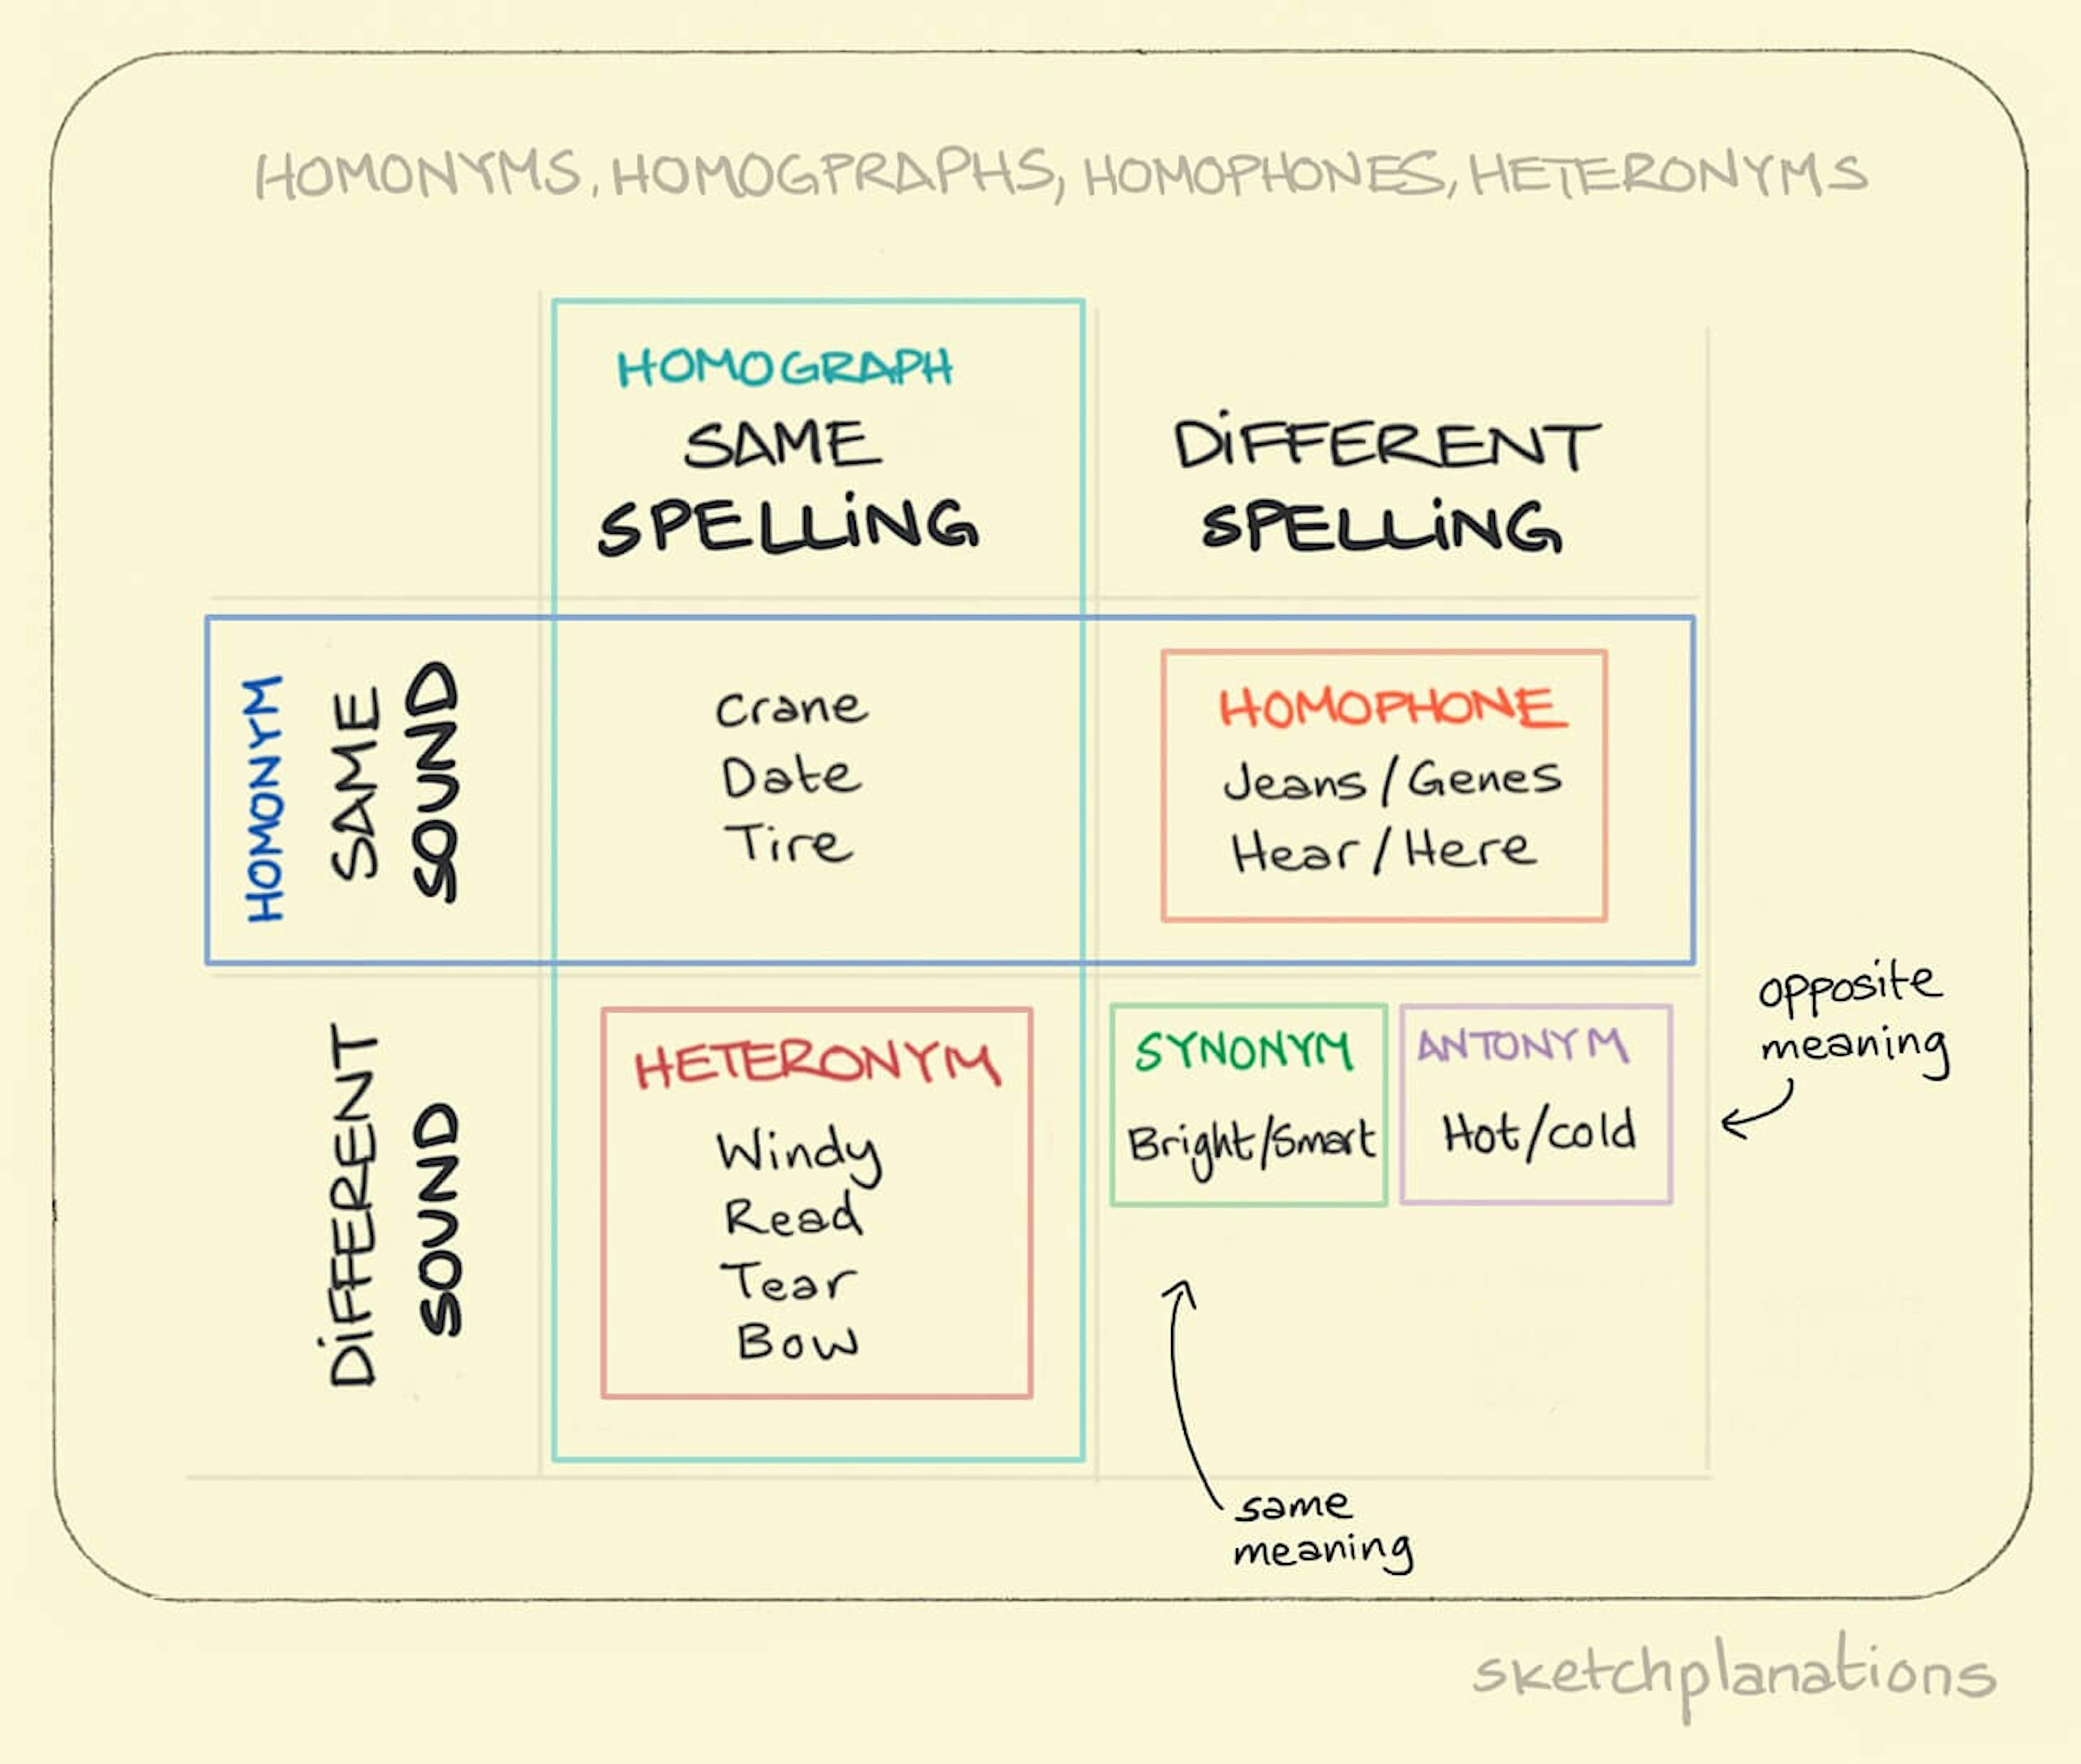 Matrix of spelling and sound showing the place of homonyms, homographs, homophones, heteronyms, synonyms and antonyms